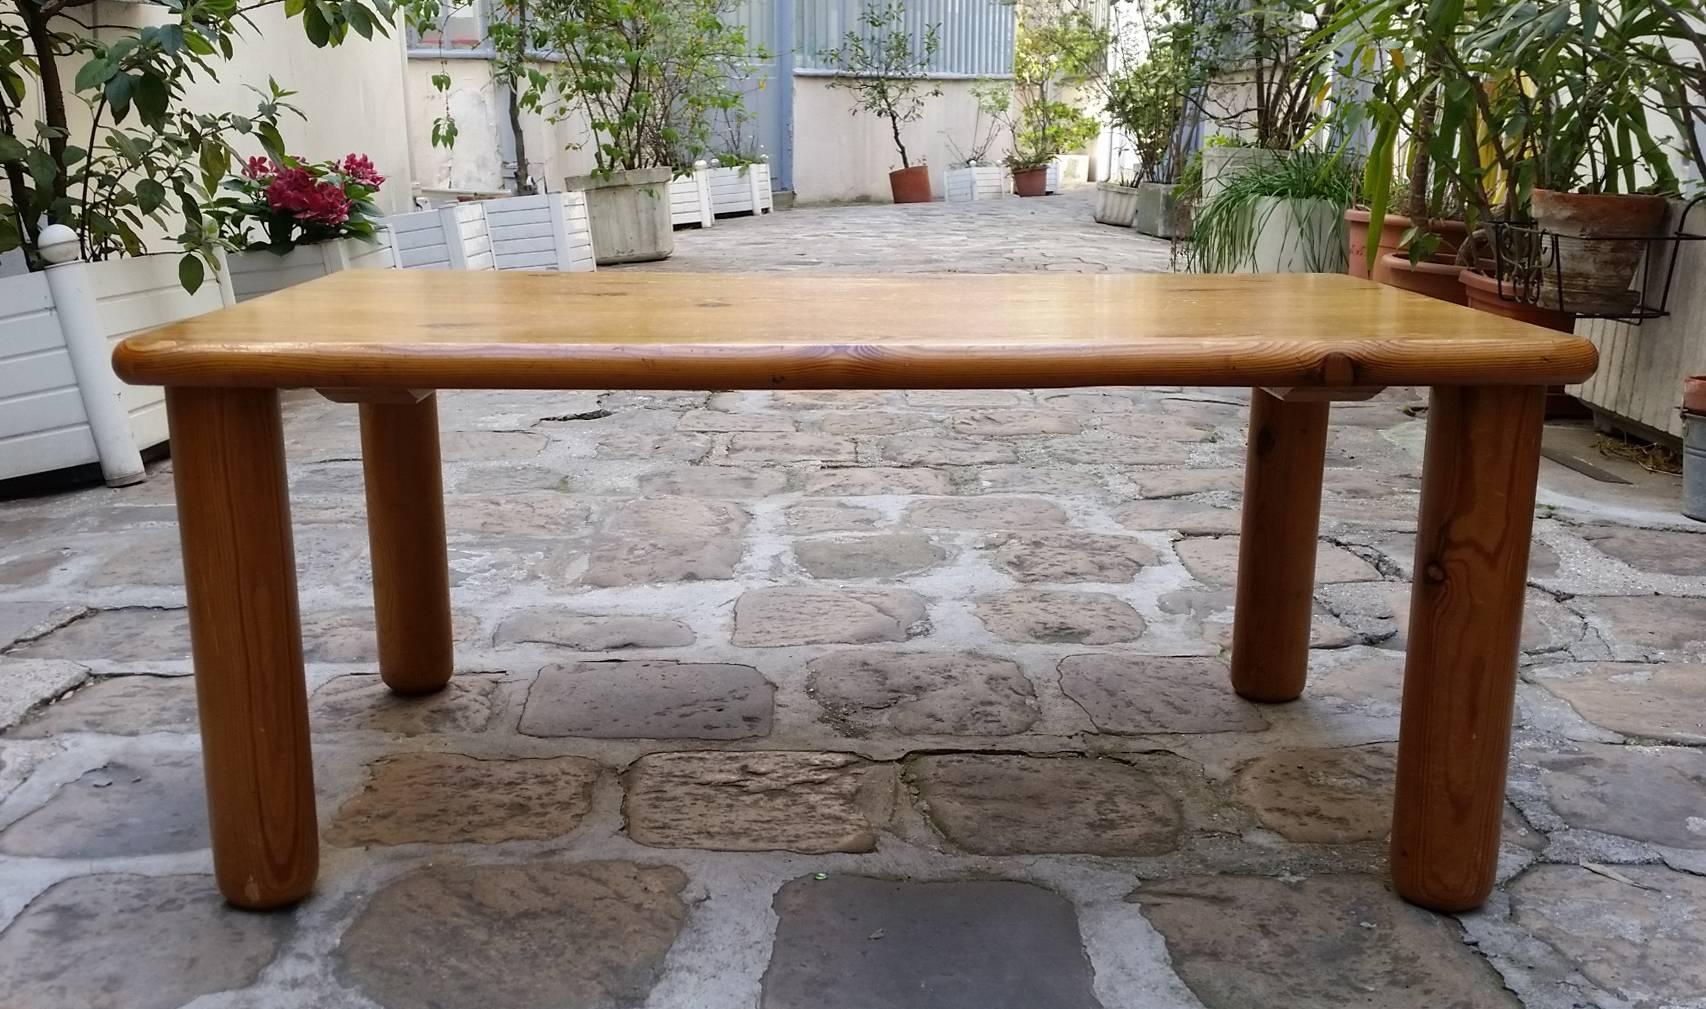 Very nice vintage Perriand Charlotte coffee table
Edition: Furniture Les Arcs, circa 1950-1960
Materials: Pine top with cylindrical base
Dimensions: W 91.5 cm x W 54 cm x H 38.5 cm
Weight: 12 kg
Good condition with wear marks.